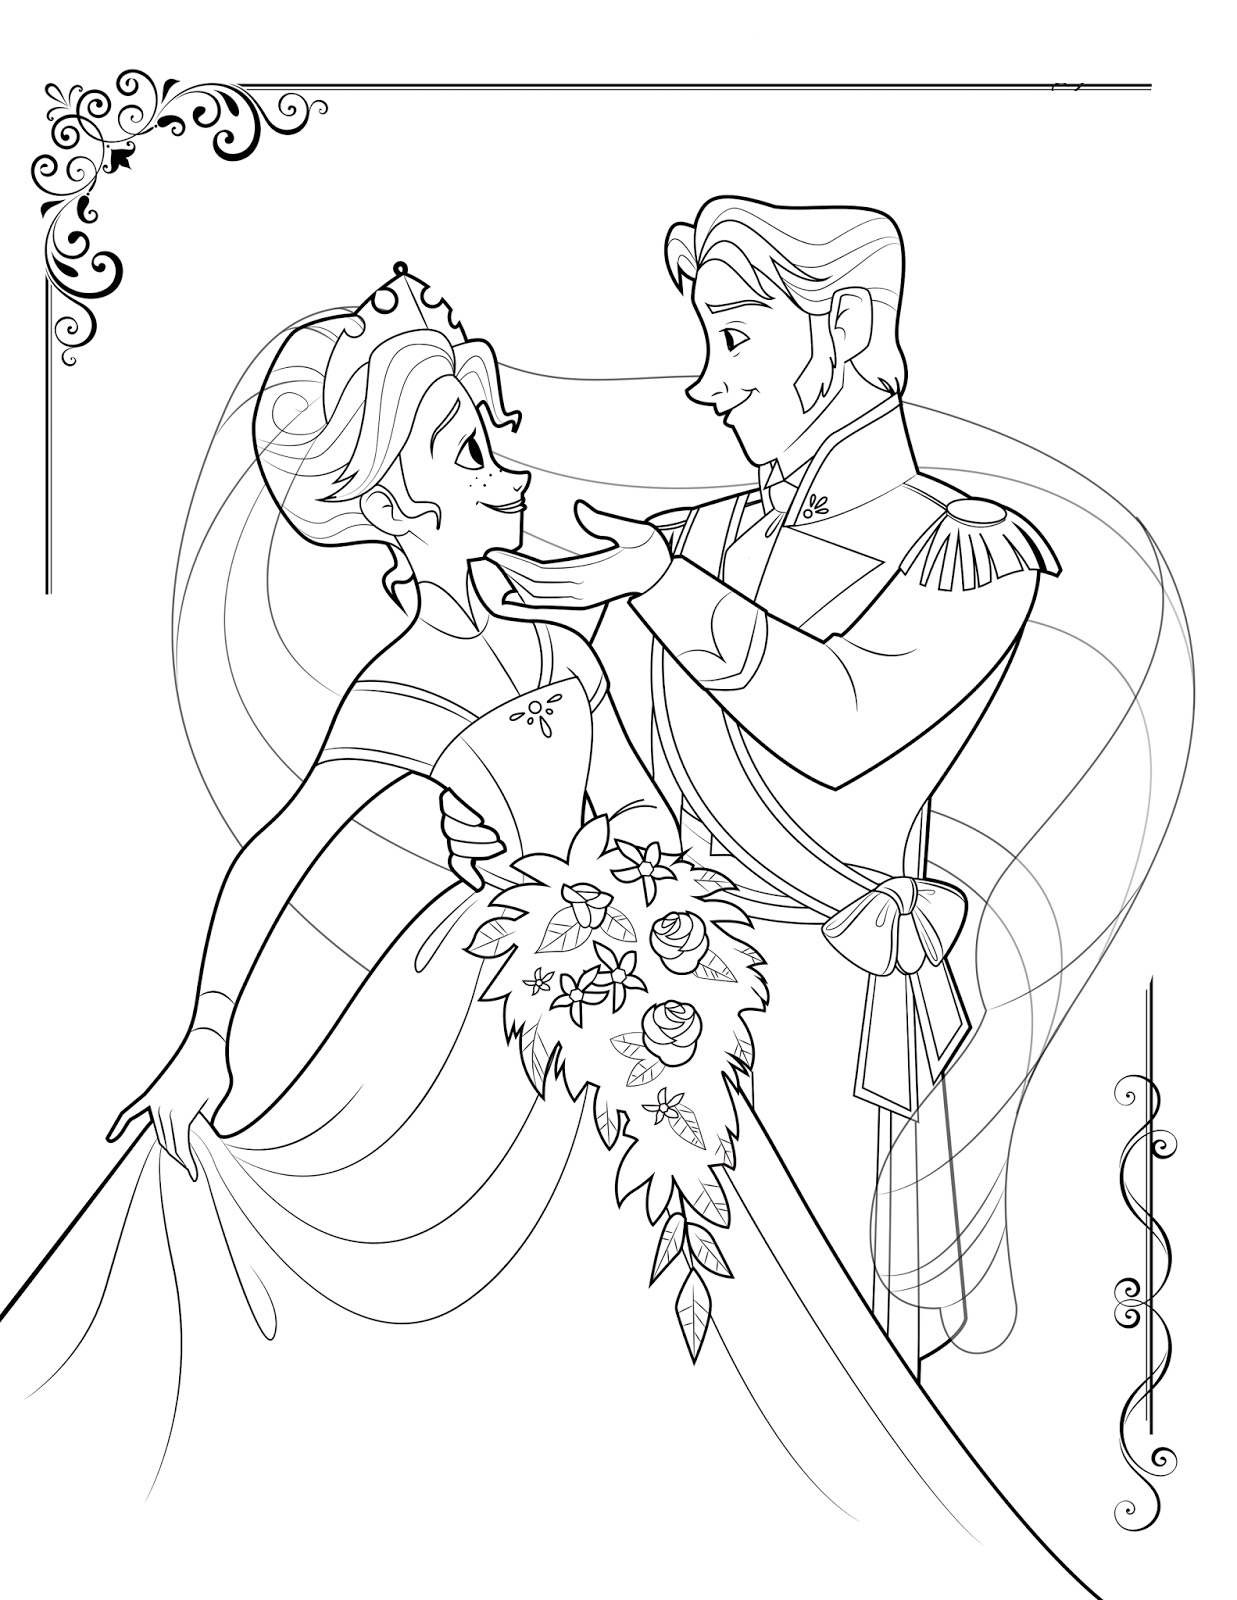 Beautiful Frozen coloring page : The wedding